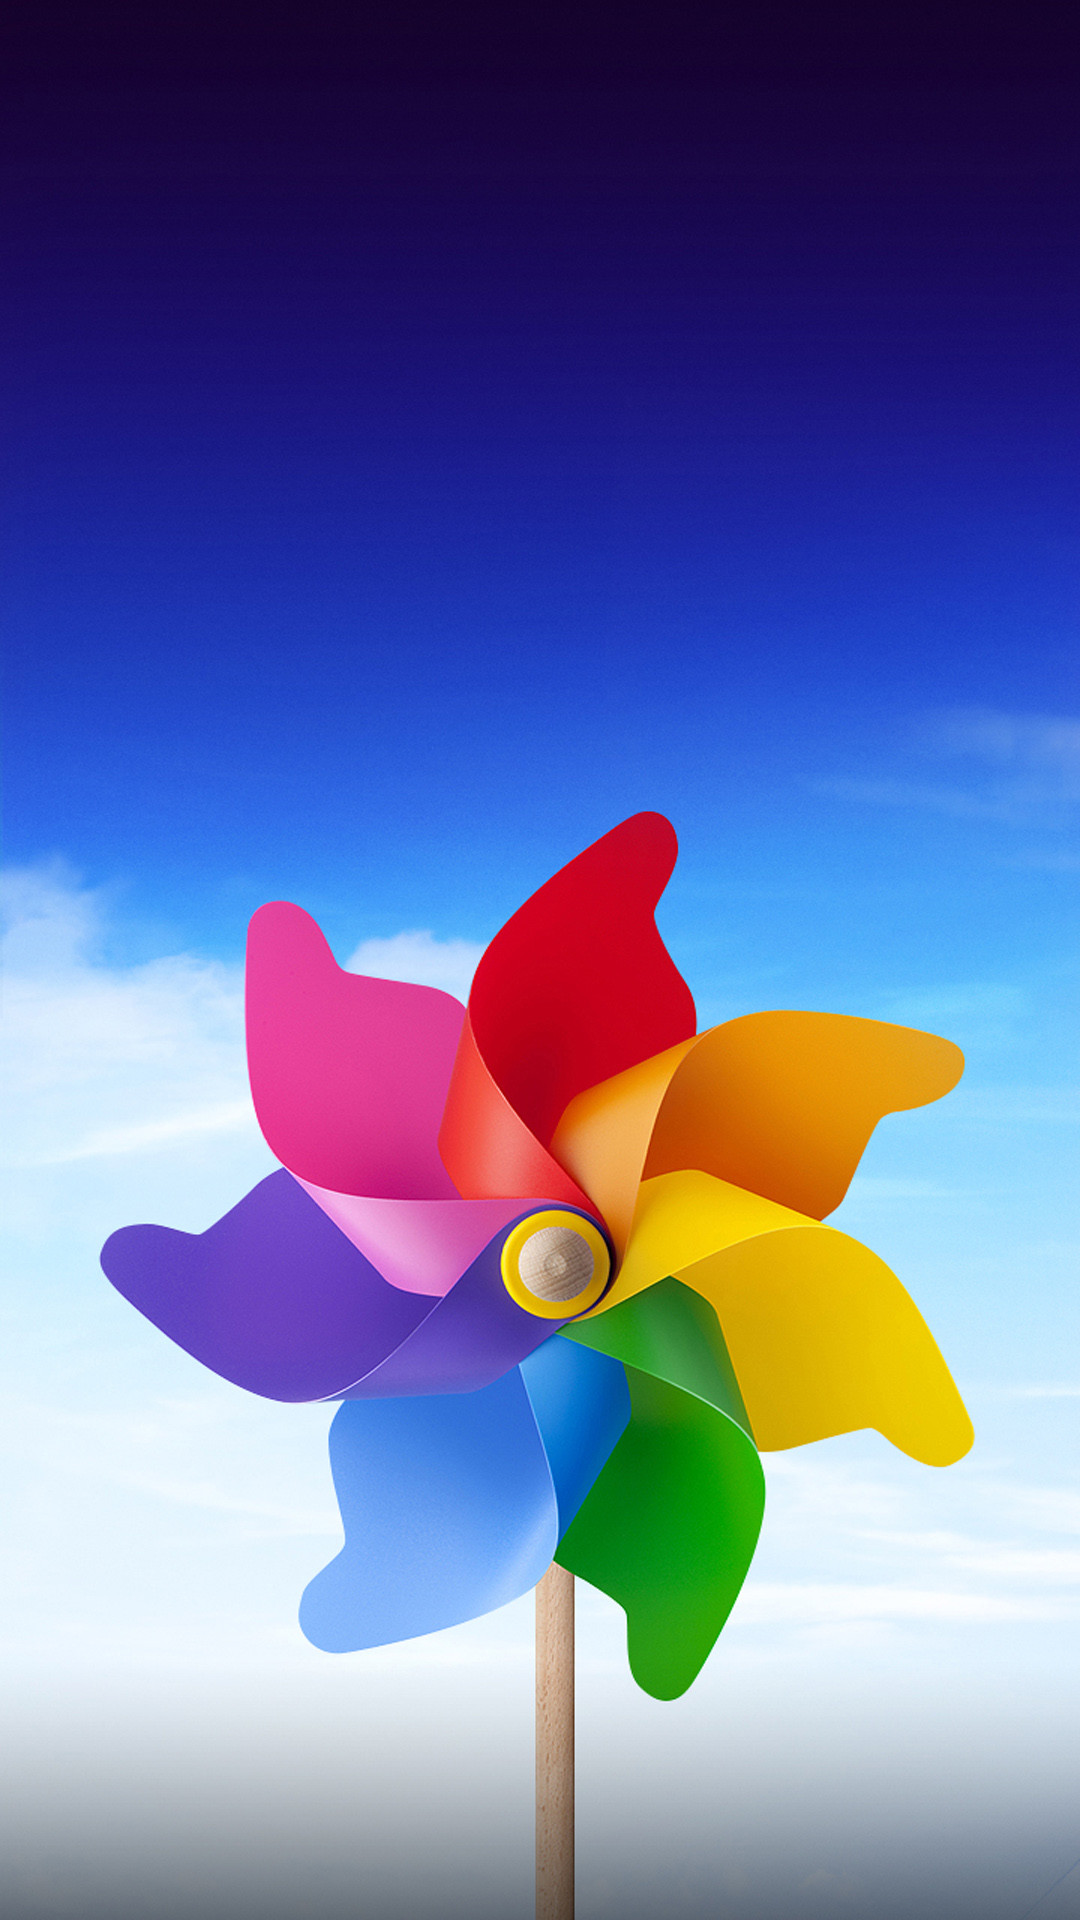 1080x1920 Great color windmill iphone 6 plus wallpaper